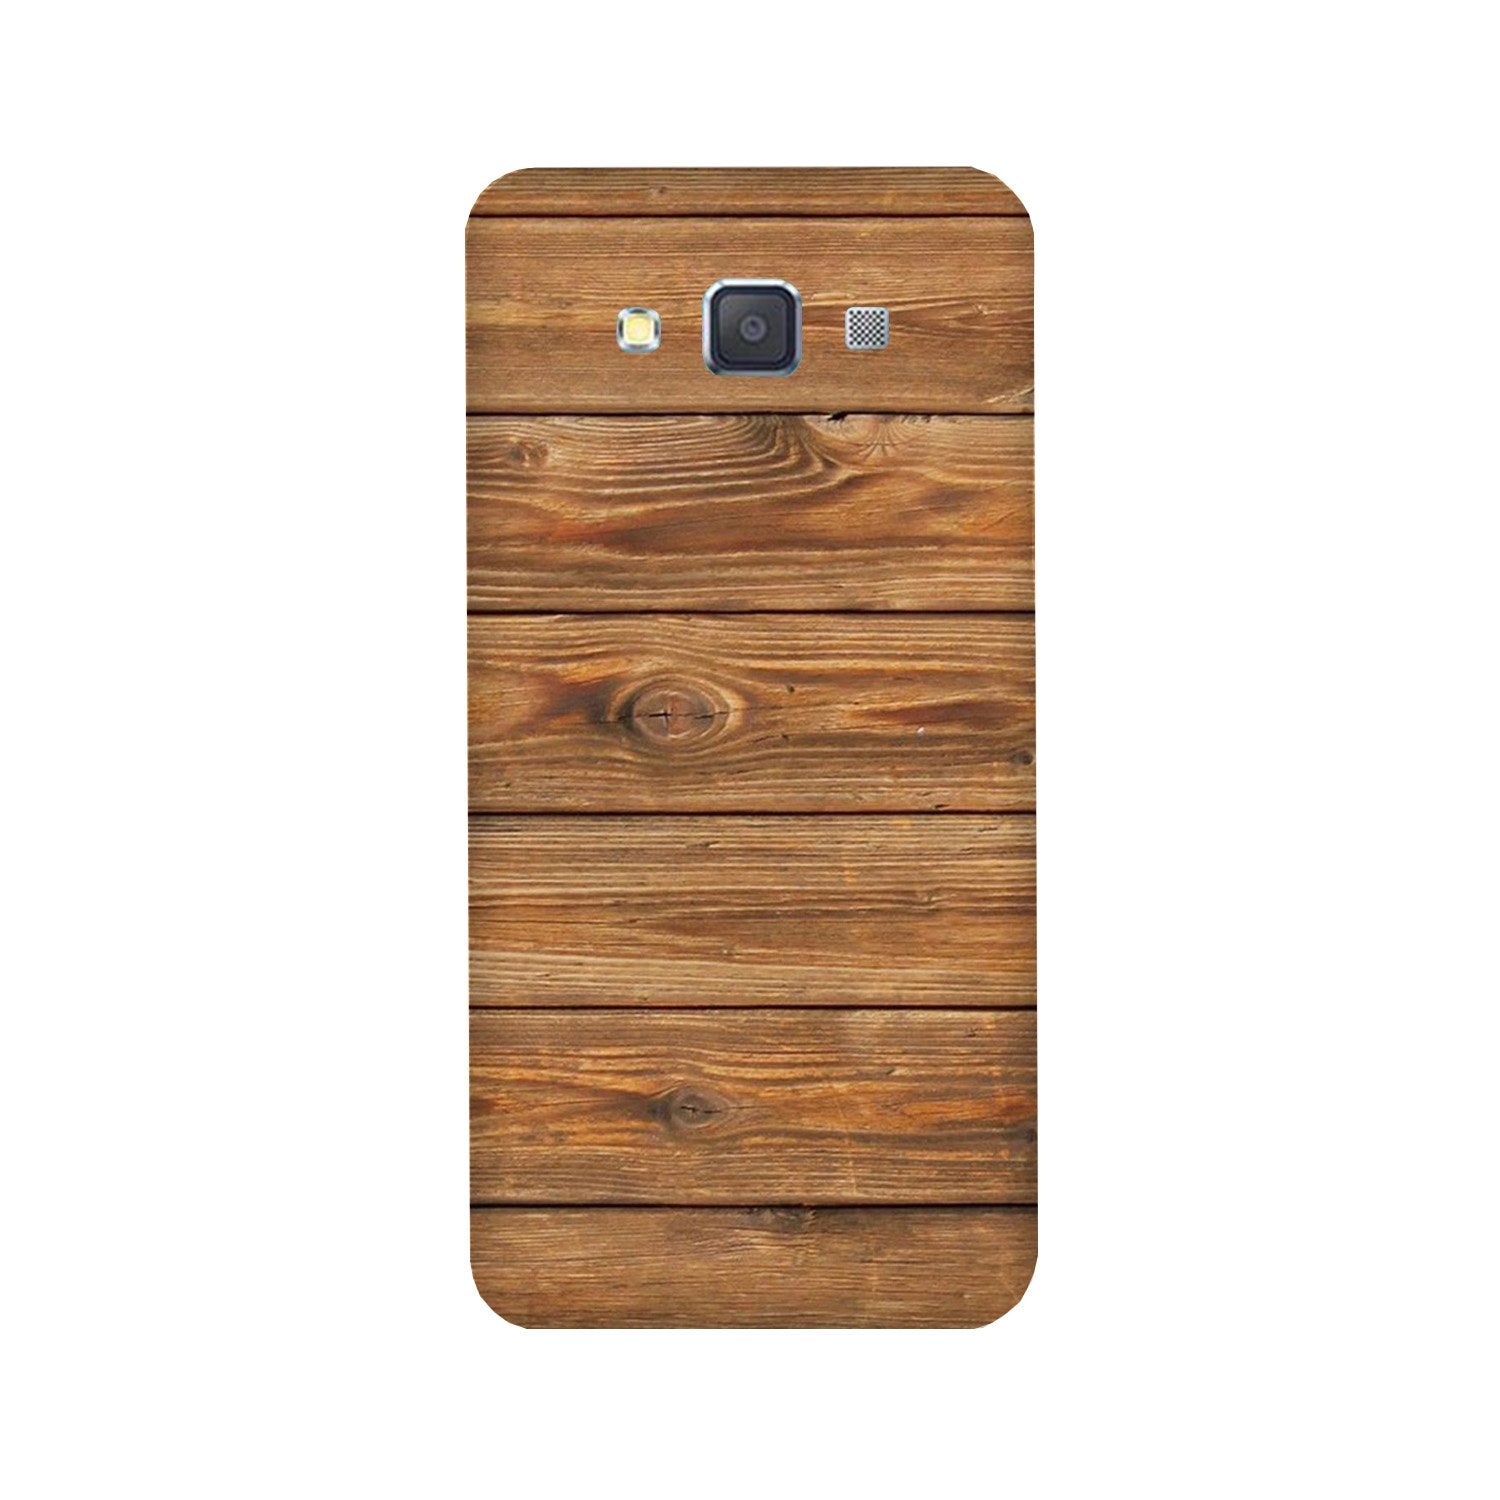 Wooden Look Case for Galaxy Grand 2(Design - 113)